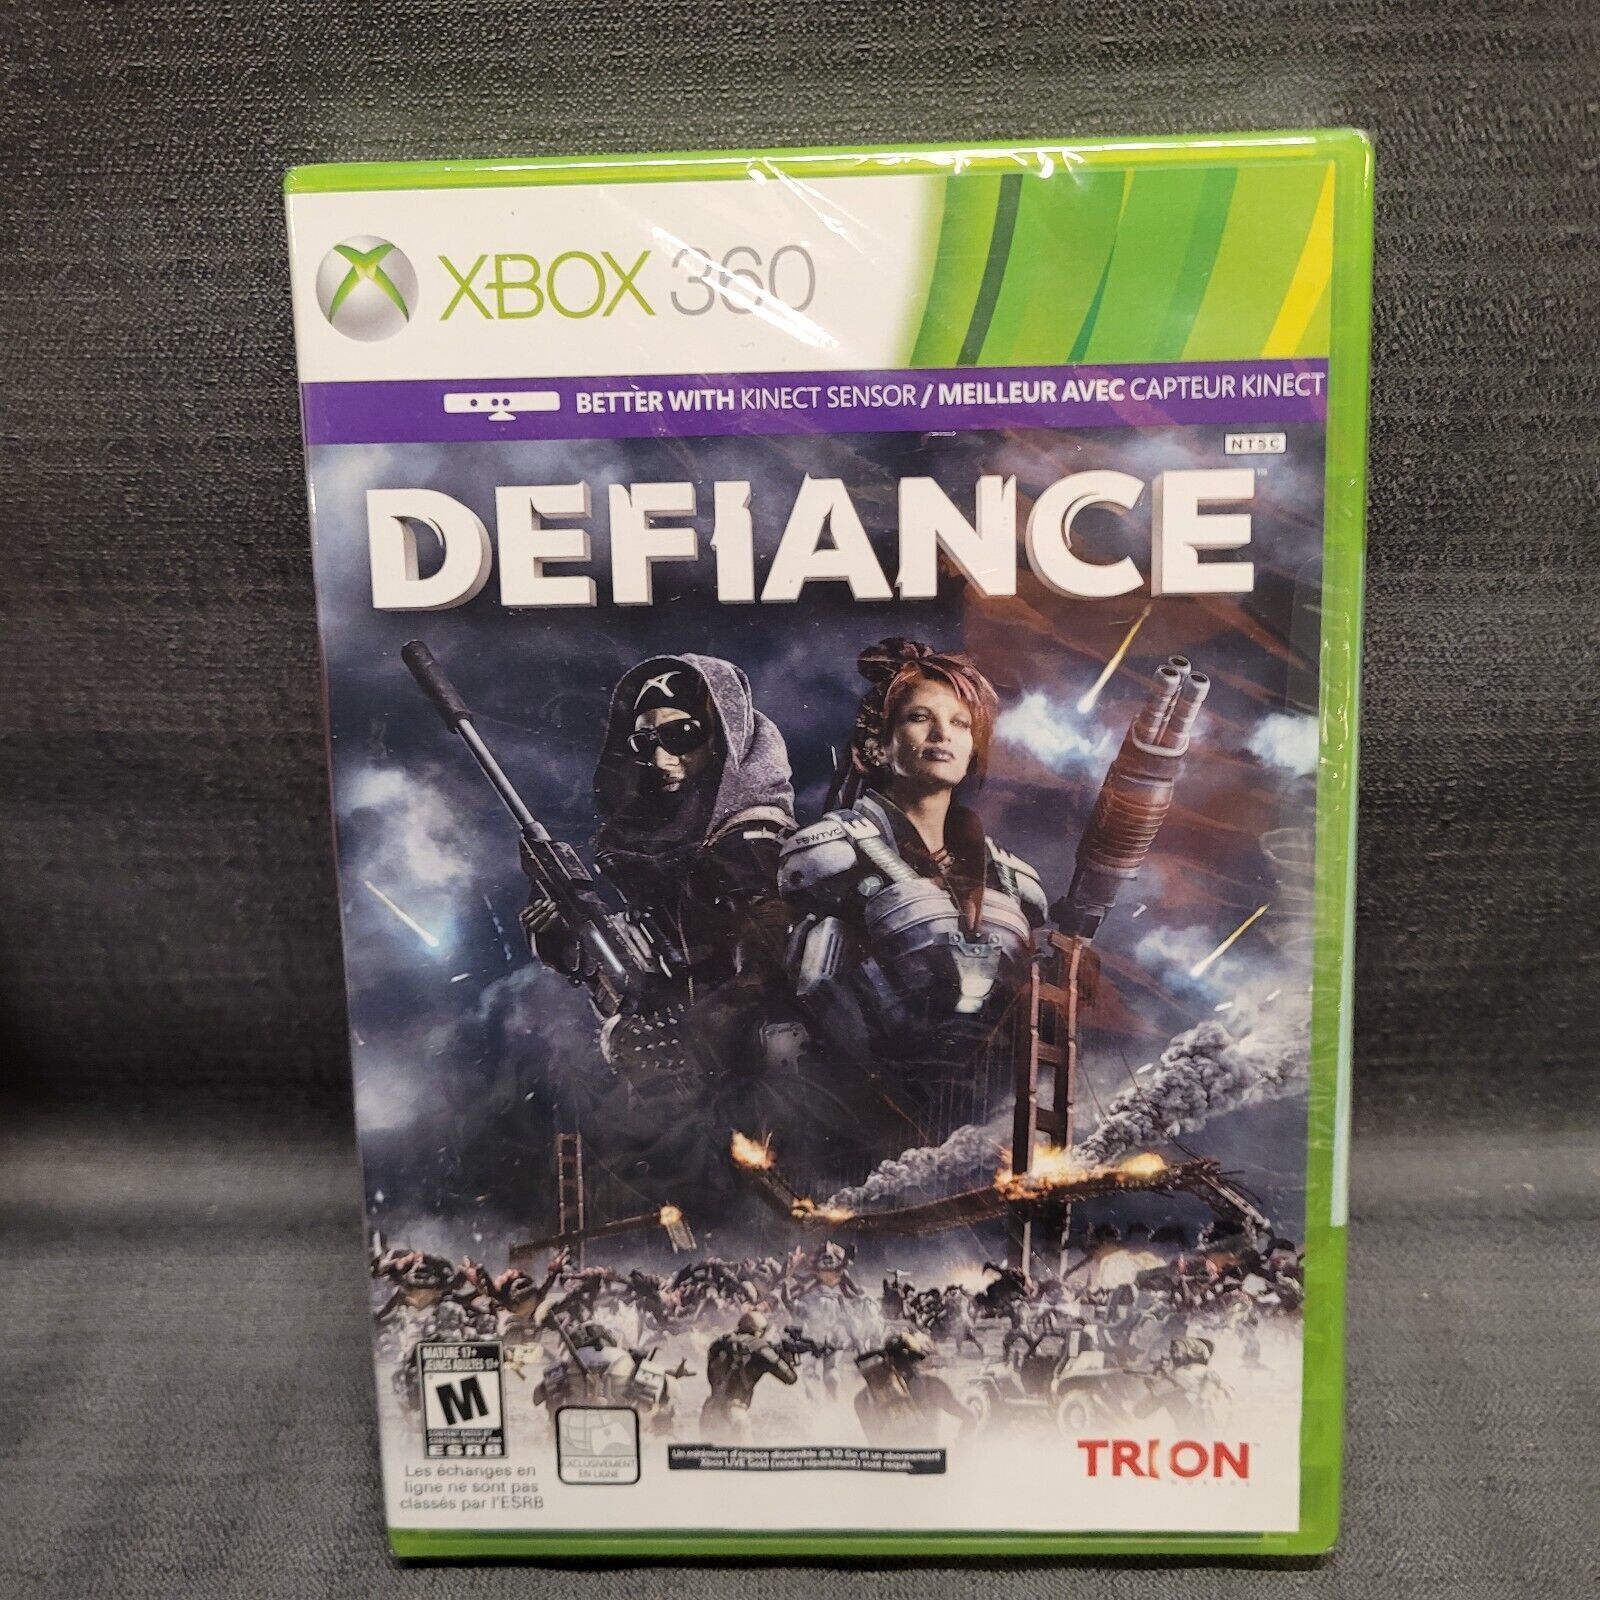 Primary image for BRAND NEW !!! Defiance (Microsoft Xbox 360, 2013) Video Game